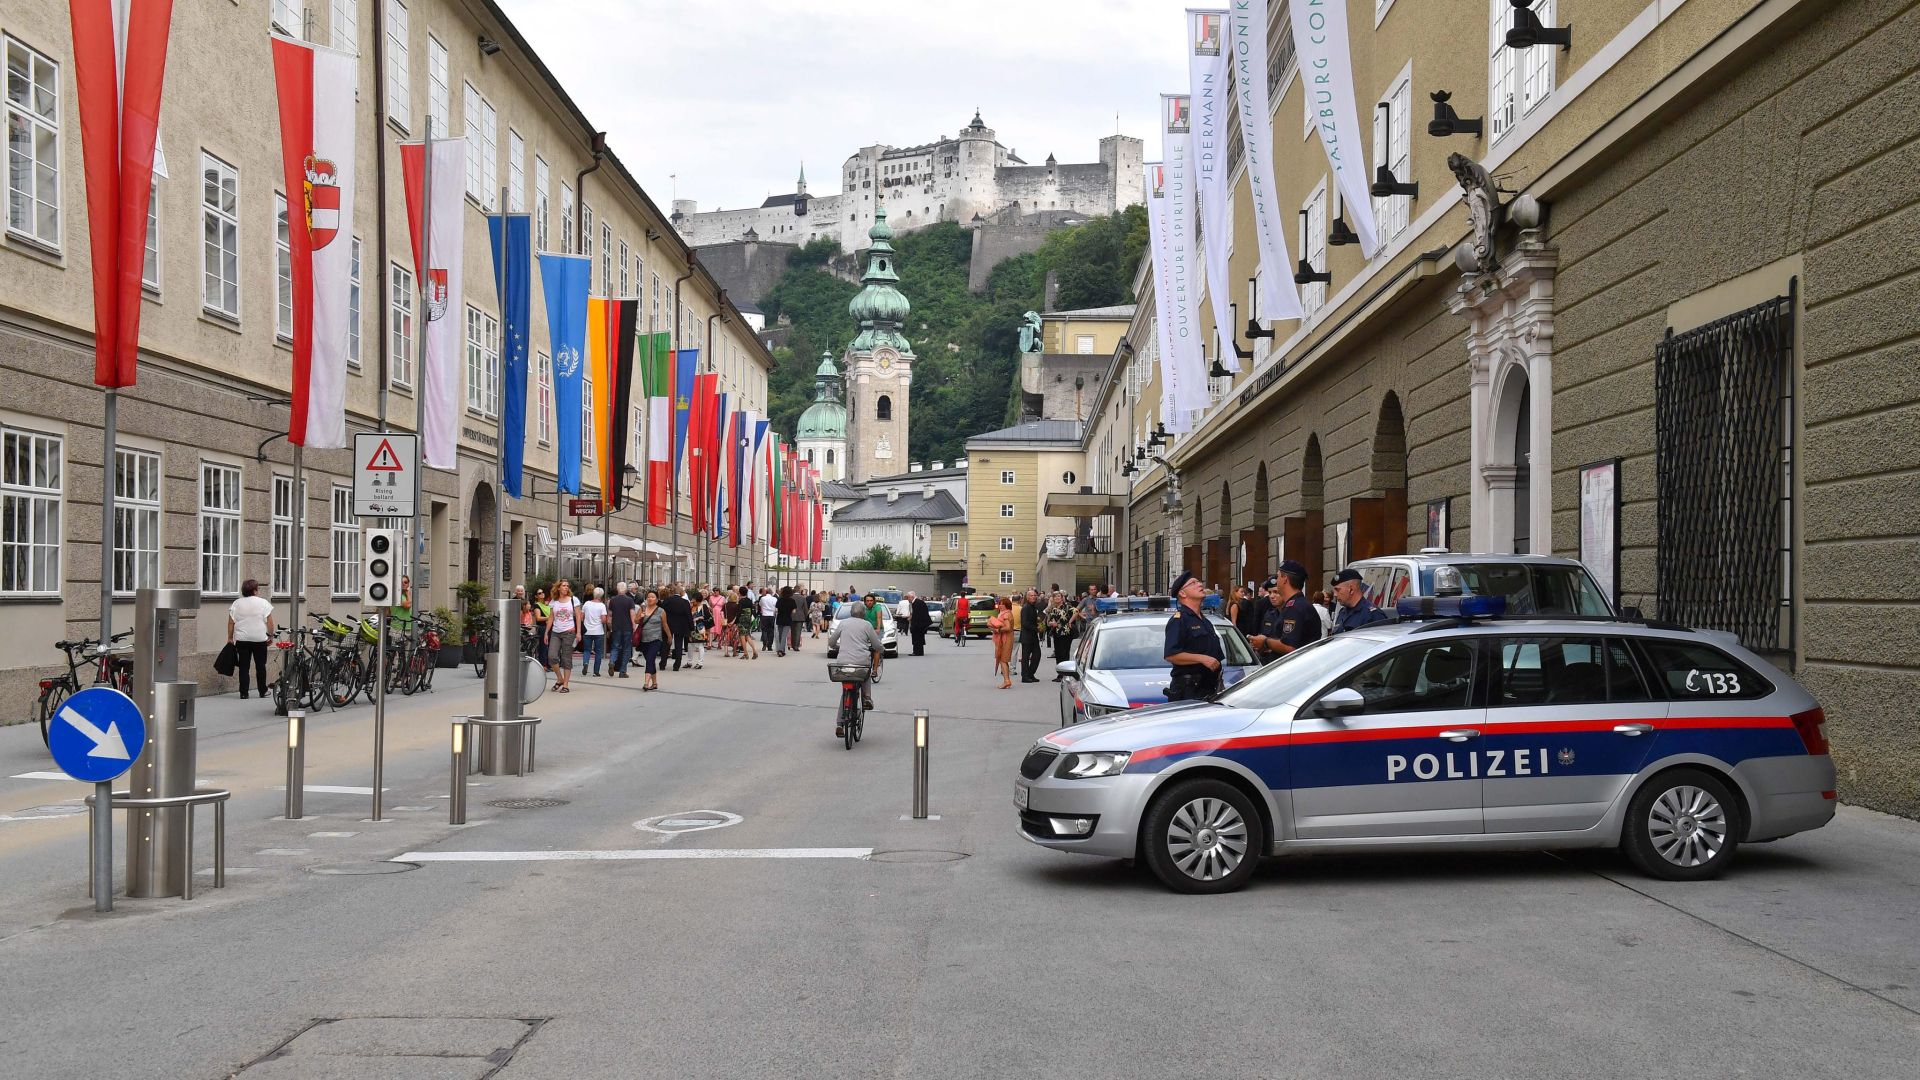 epa05445884 Police cars stand in the Hofstallgasse prior to the premiere of Thomas Ades' opera 'The Exterminating Angel' during the Salzburg Festival, in Salzburg, Austria, 28 July 2016. The festival runs from 22 July to 31 August  EPA/KERSTIN JOENSSON